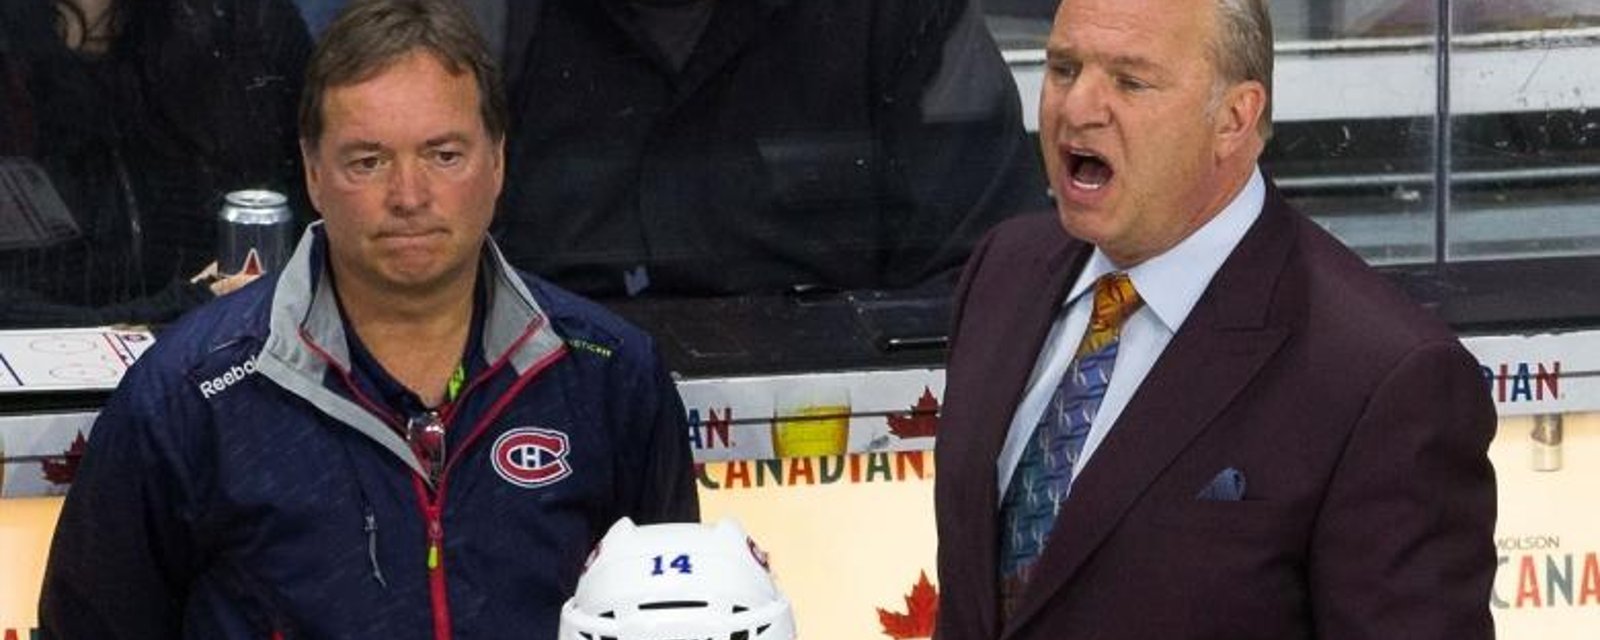 Habs Therrien responds to questions about his future in Montreal.